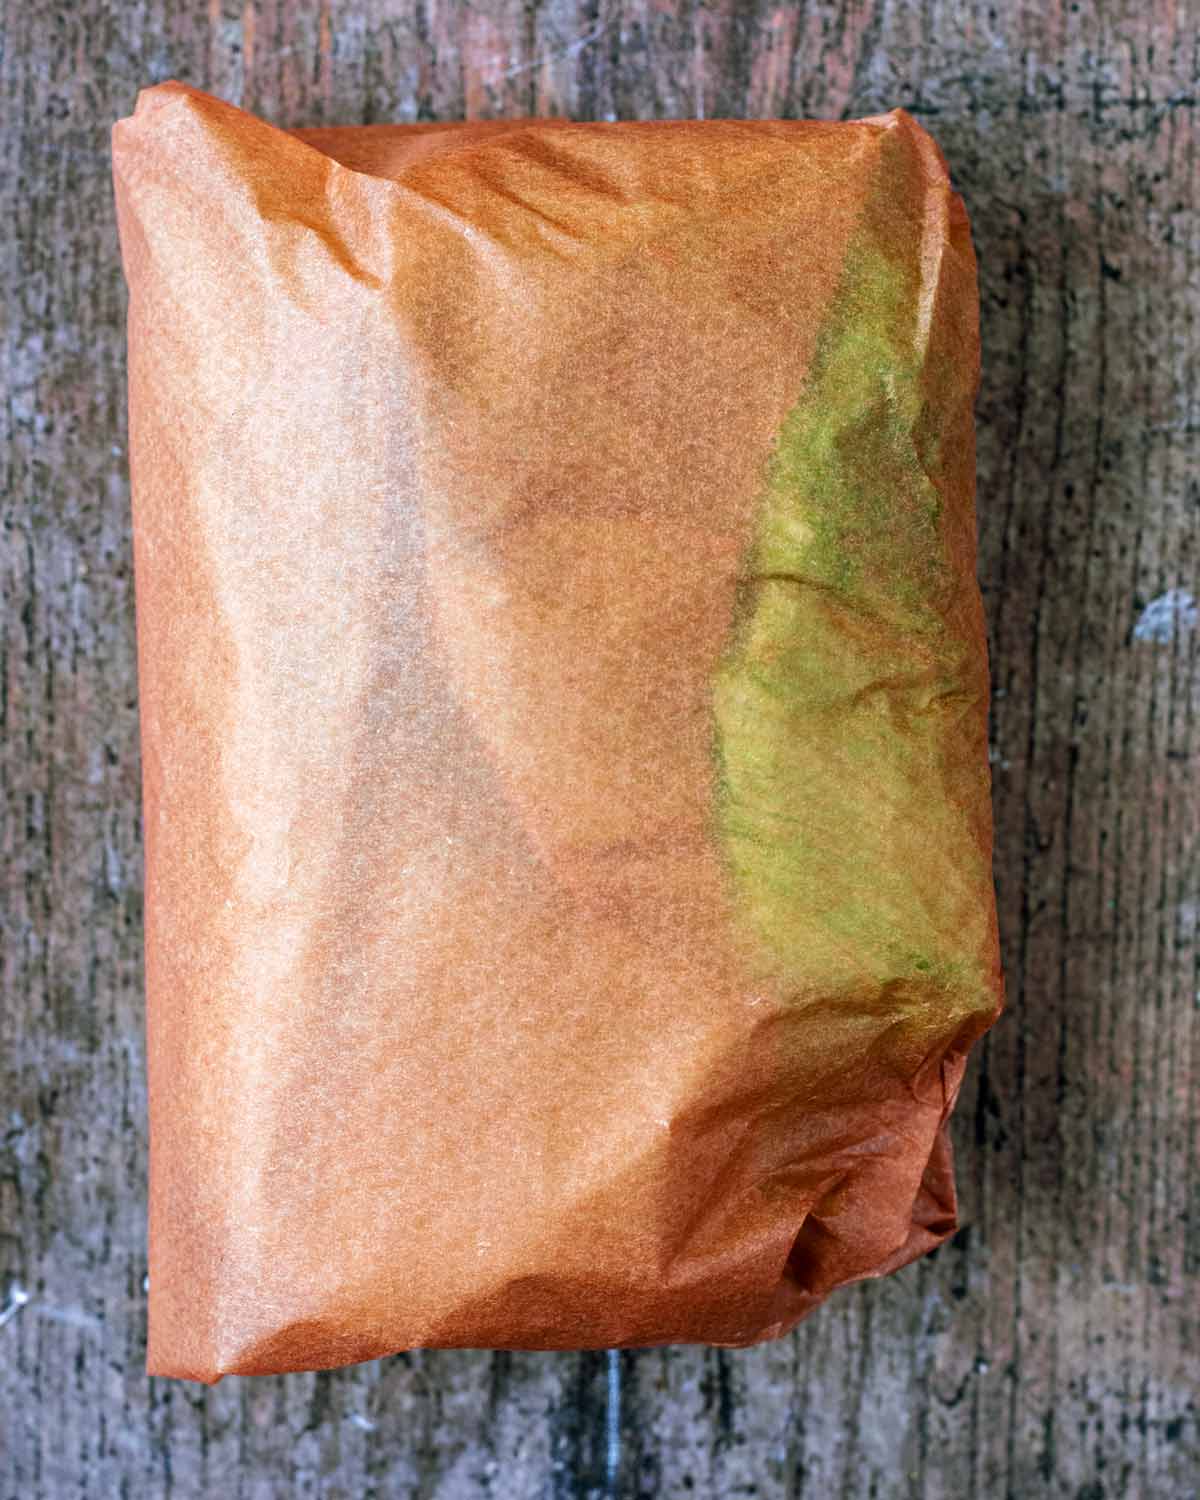 The lettuce wrap folded up and wrapped in parchment paper.